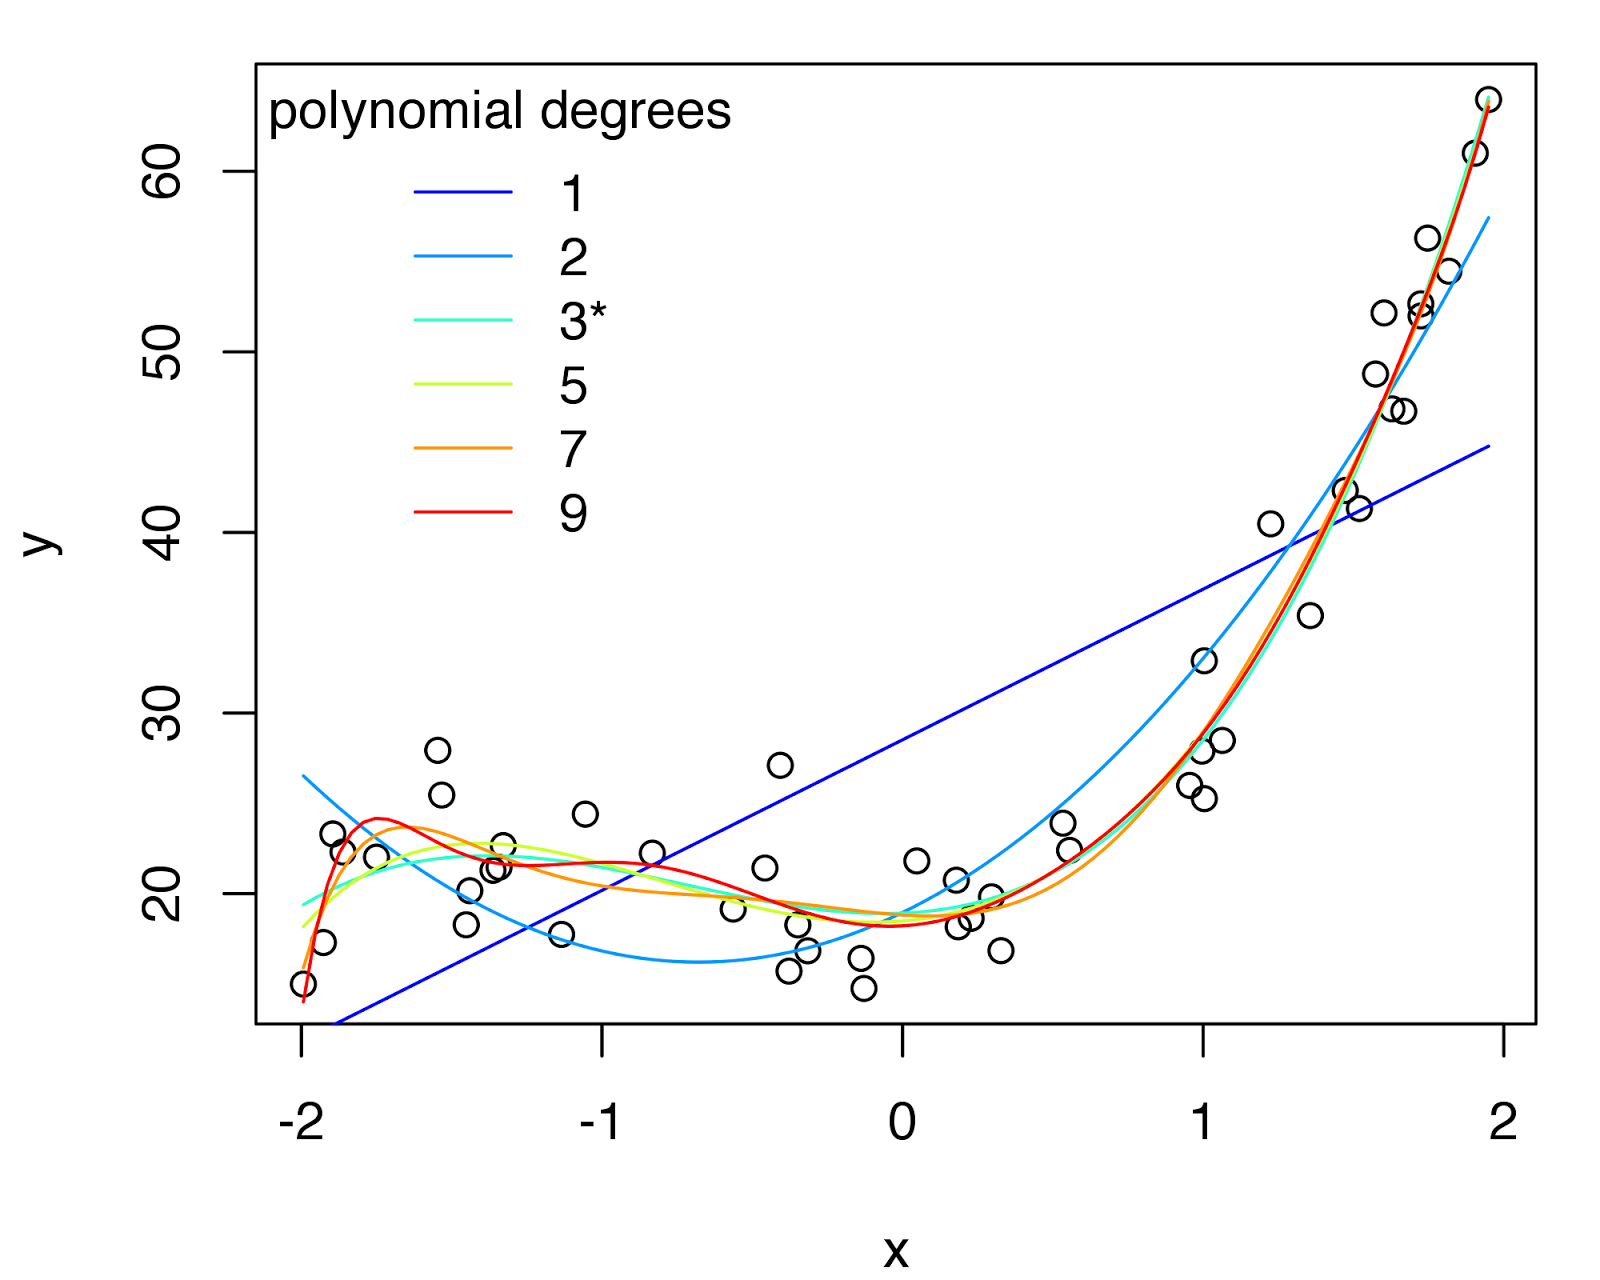 Graph of model fit with different degree polynomials